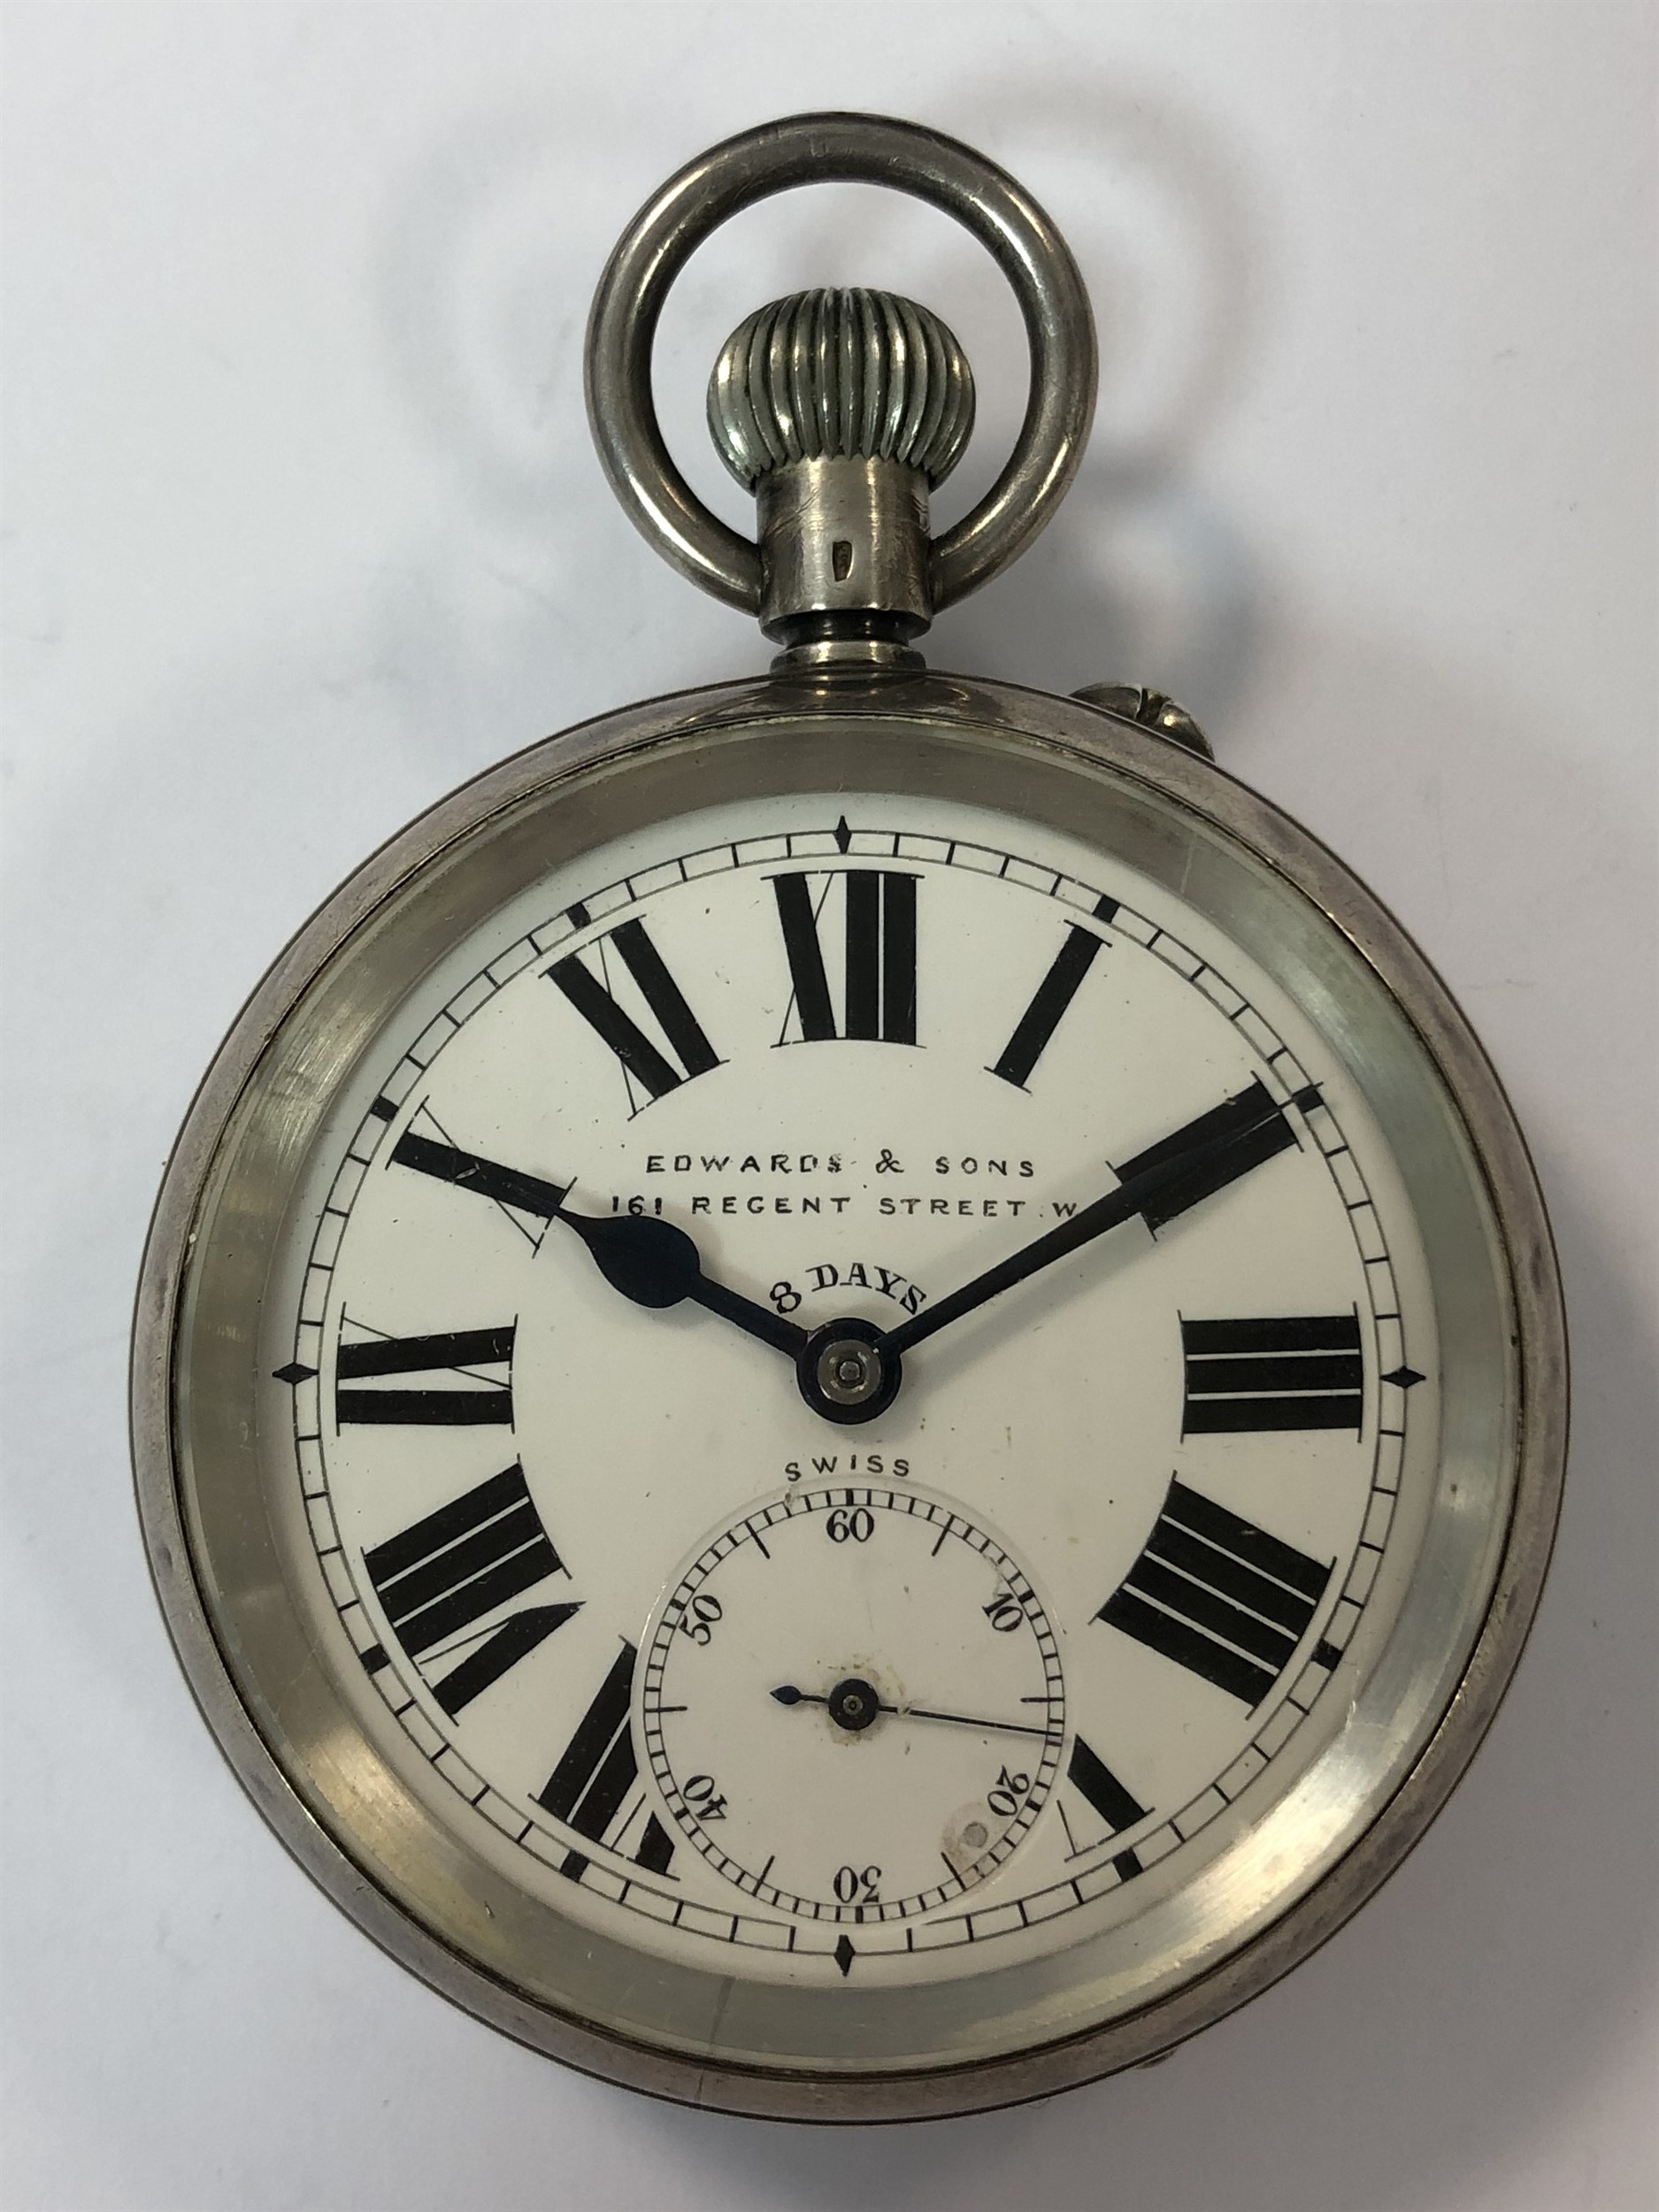 Edwards & Sons, London - An early 20th century Swiss silver 8 day open faced pocket watch,